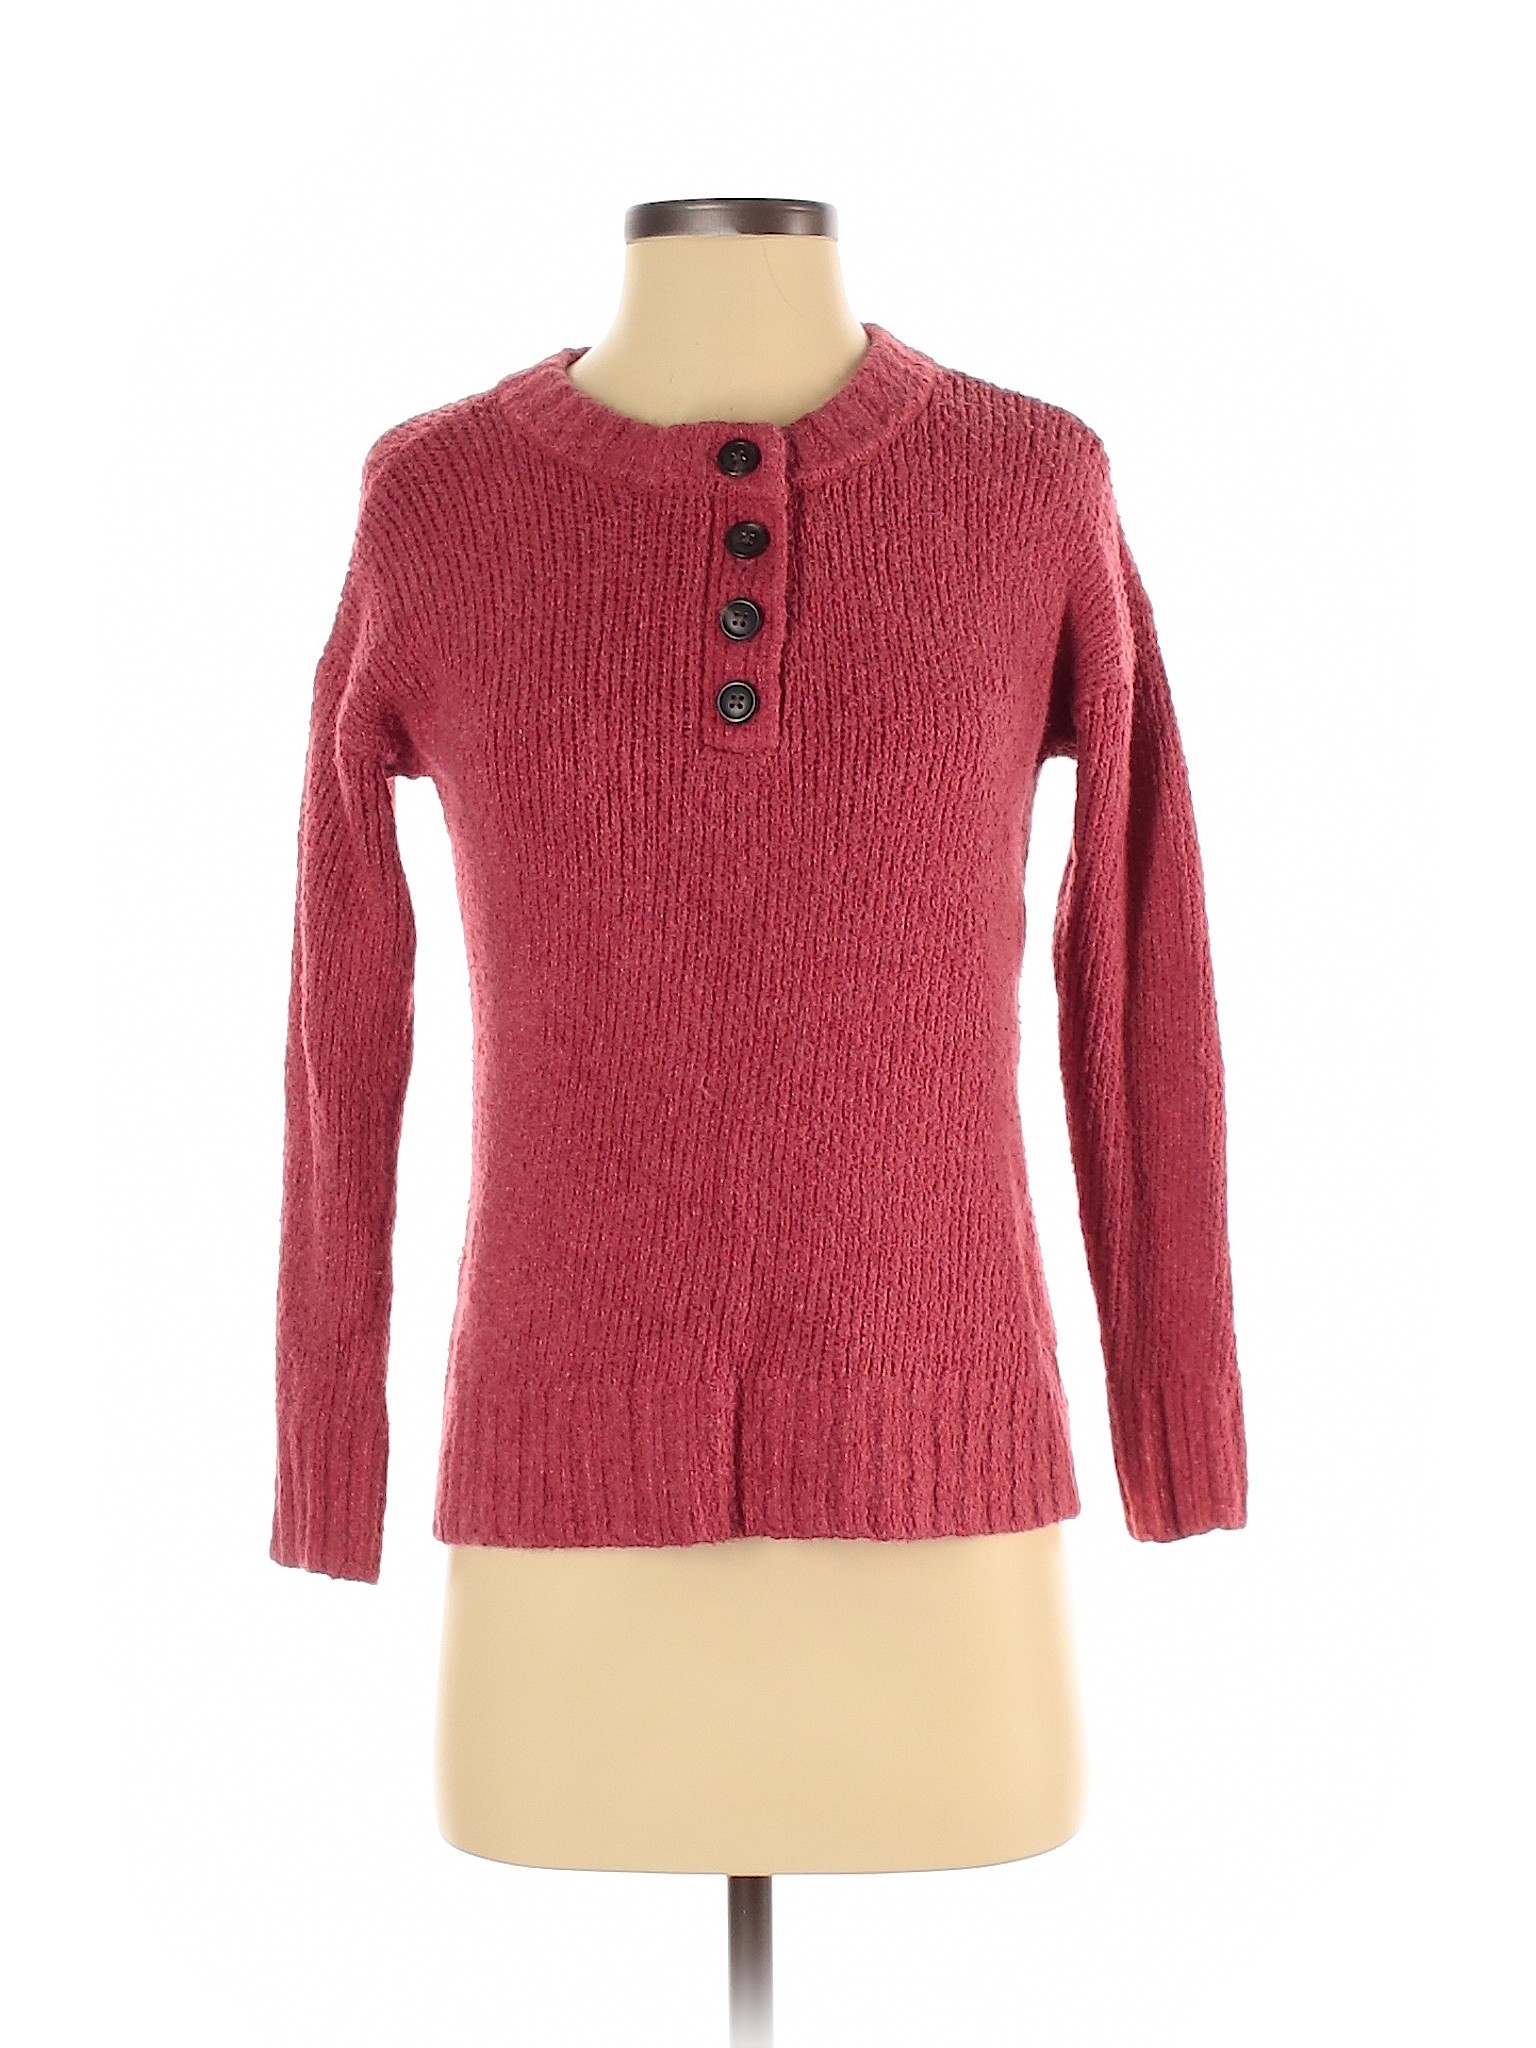 American Eagle Outfitters Women Red Pullover Sweater XL | eBay